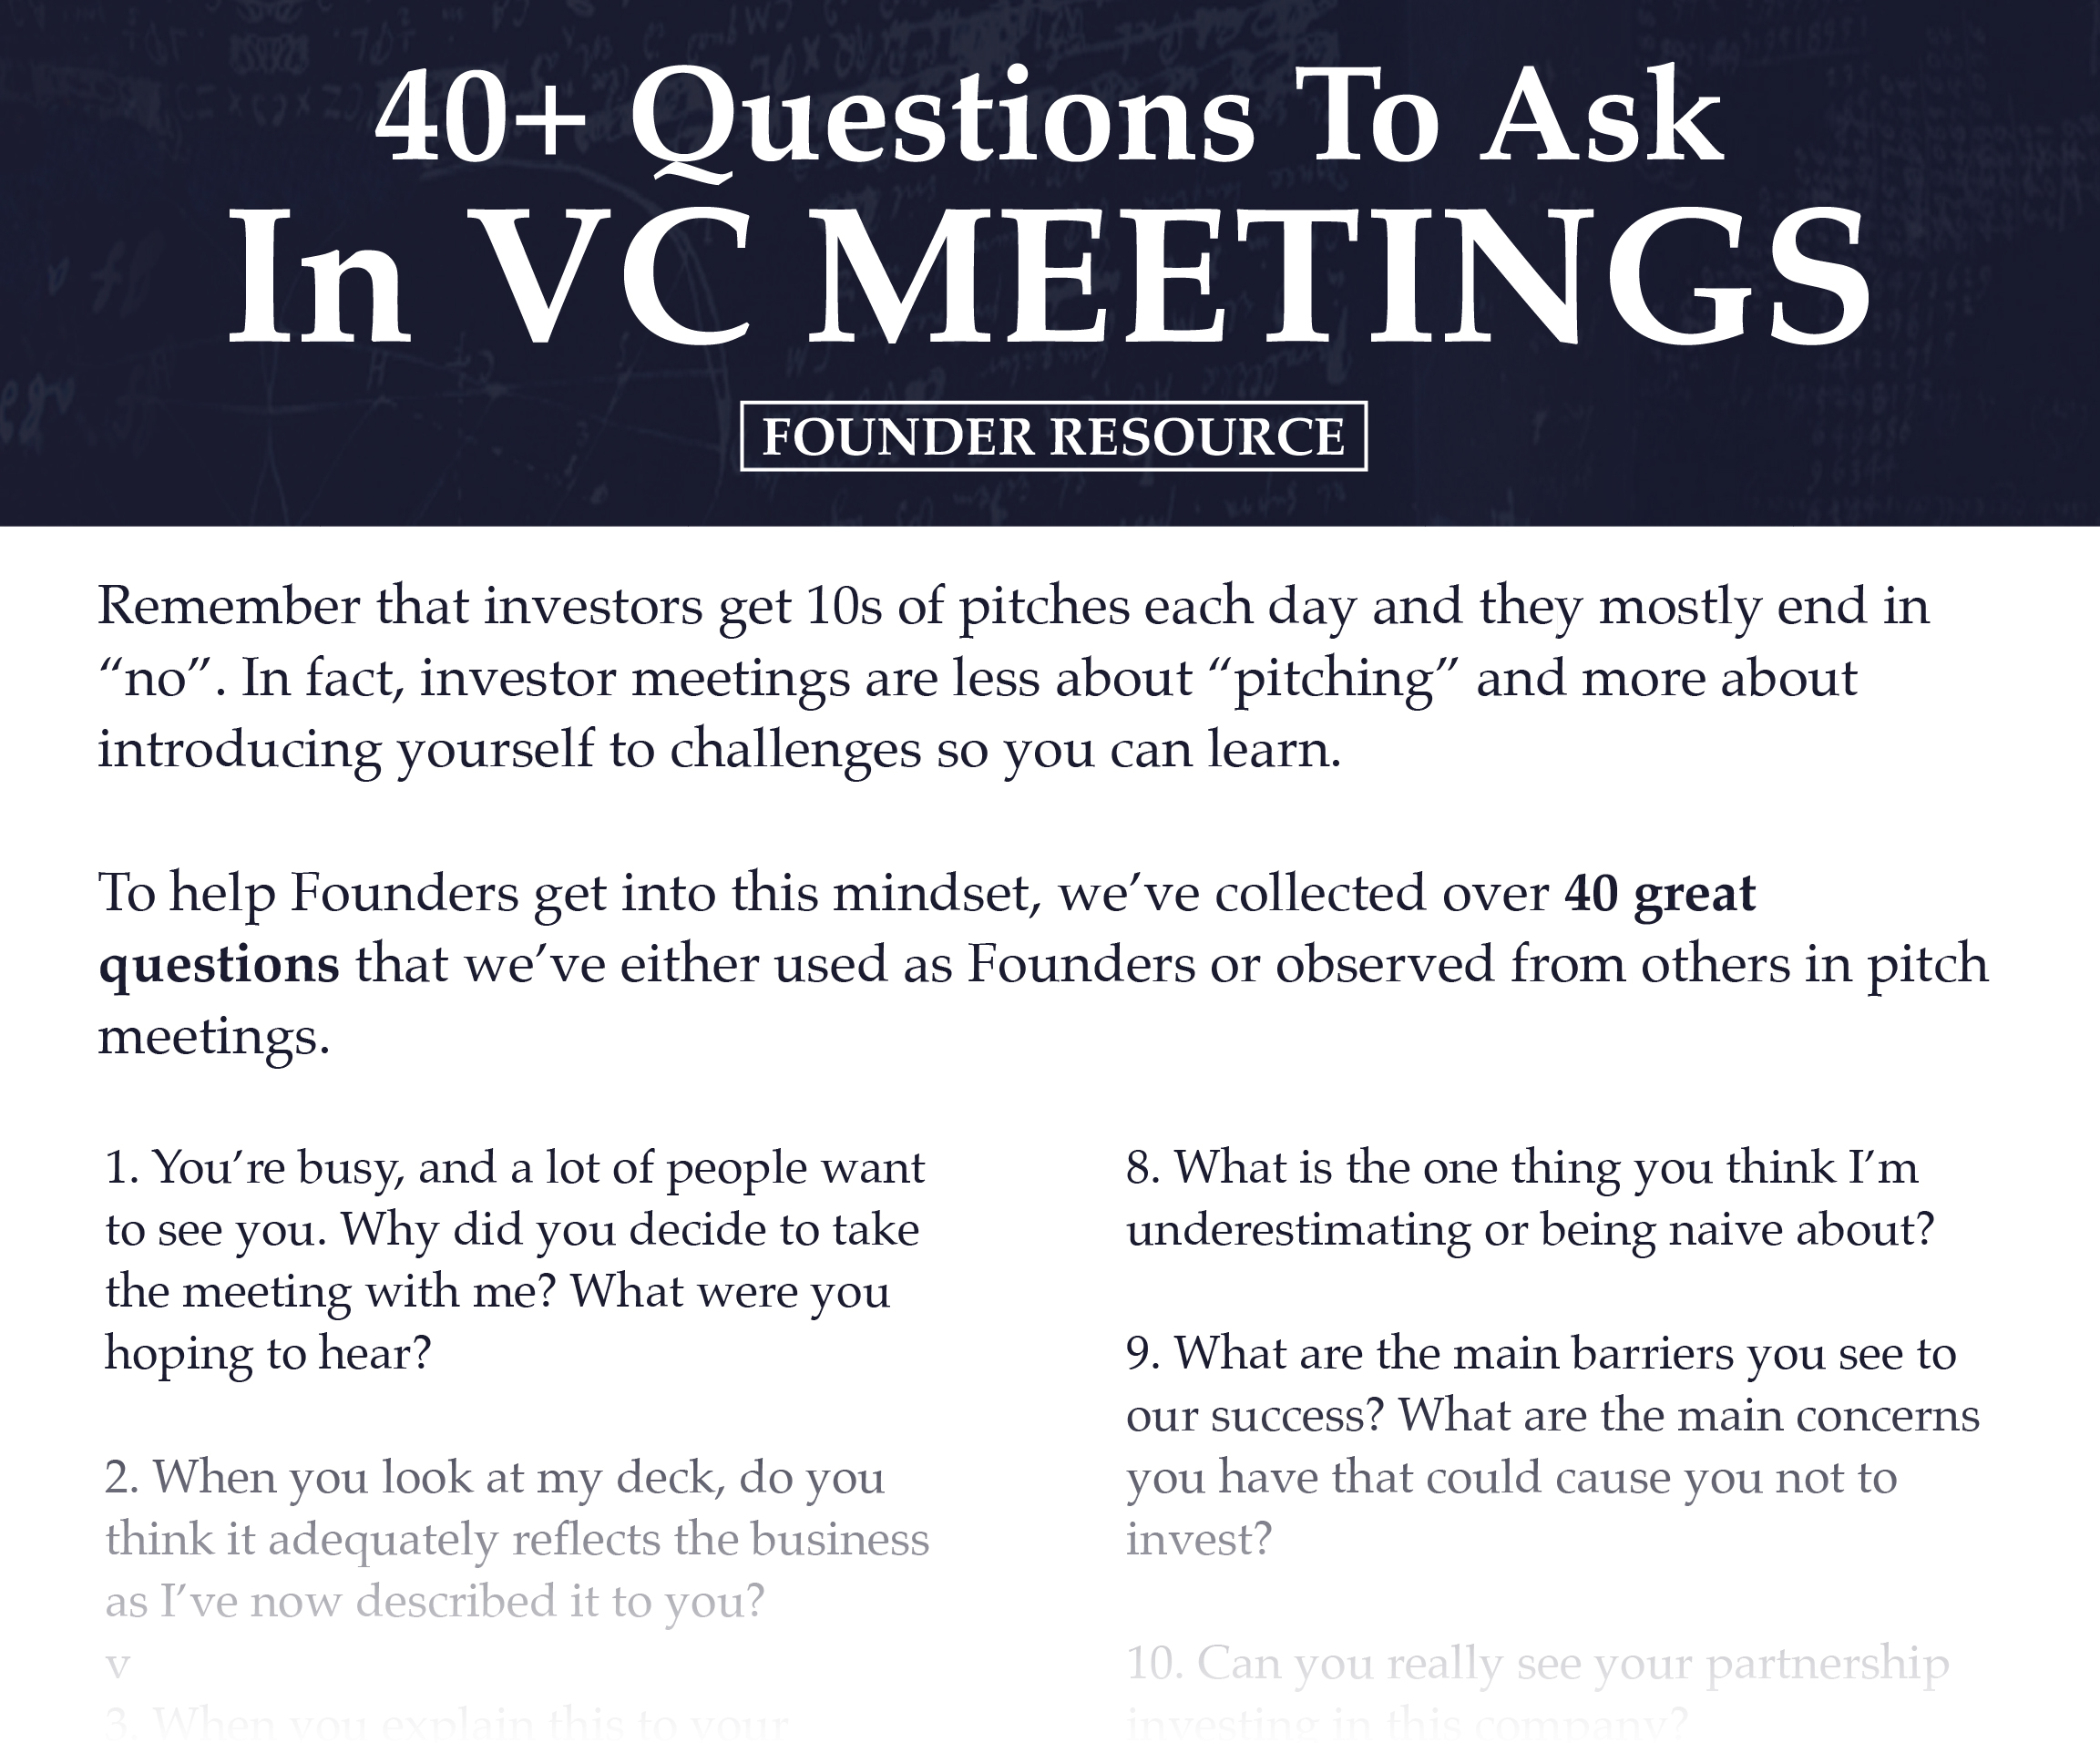 40 Questions to Ask in VC Meetings